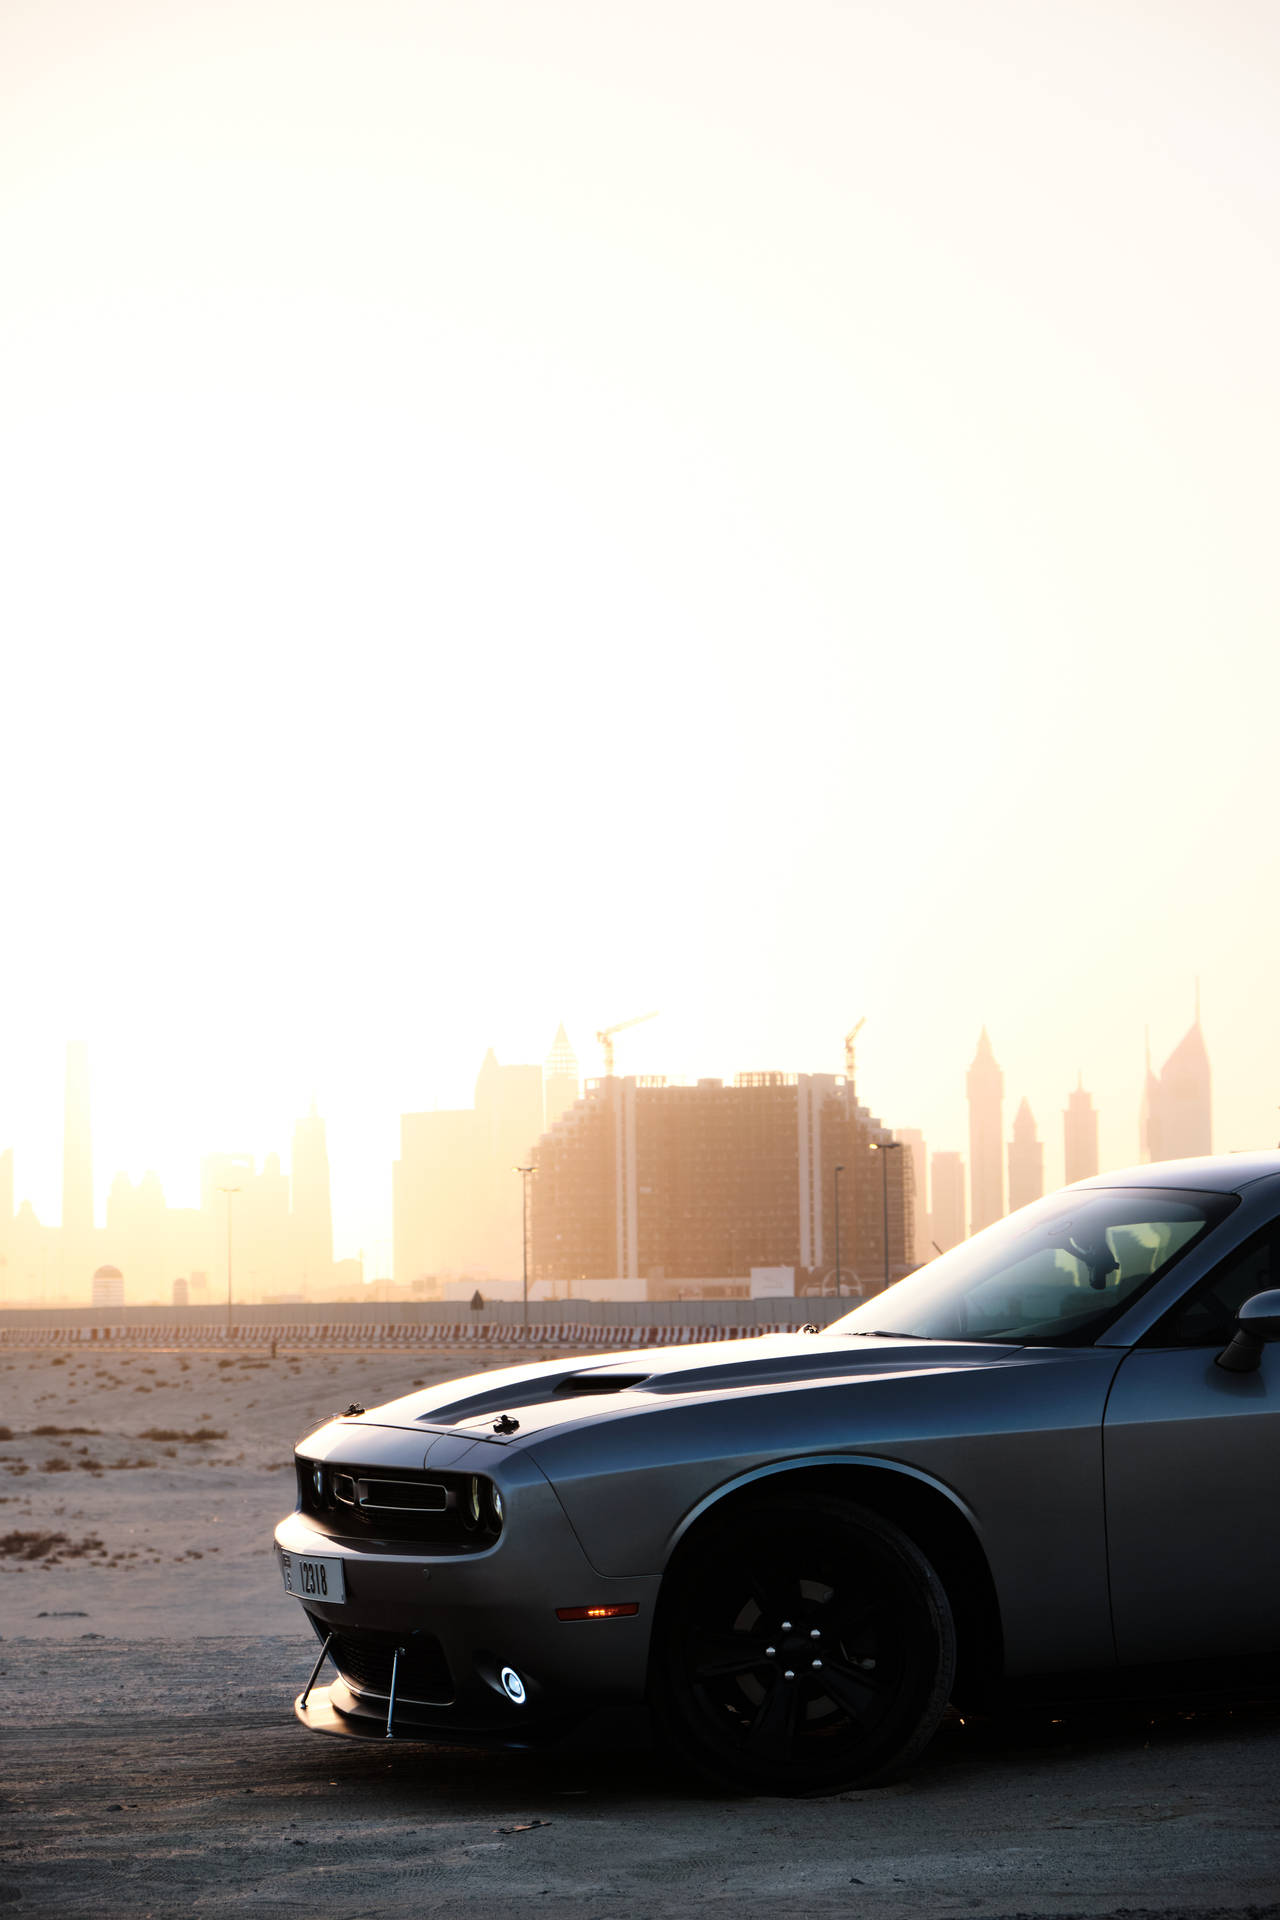 Dodge Challenger By The Sunlight